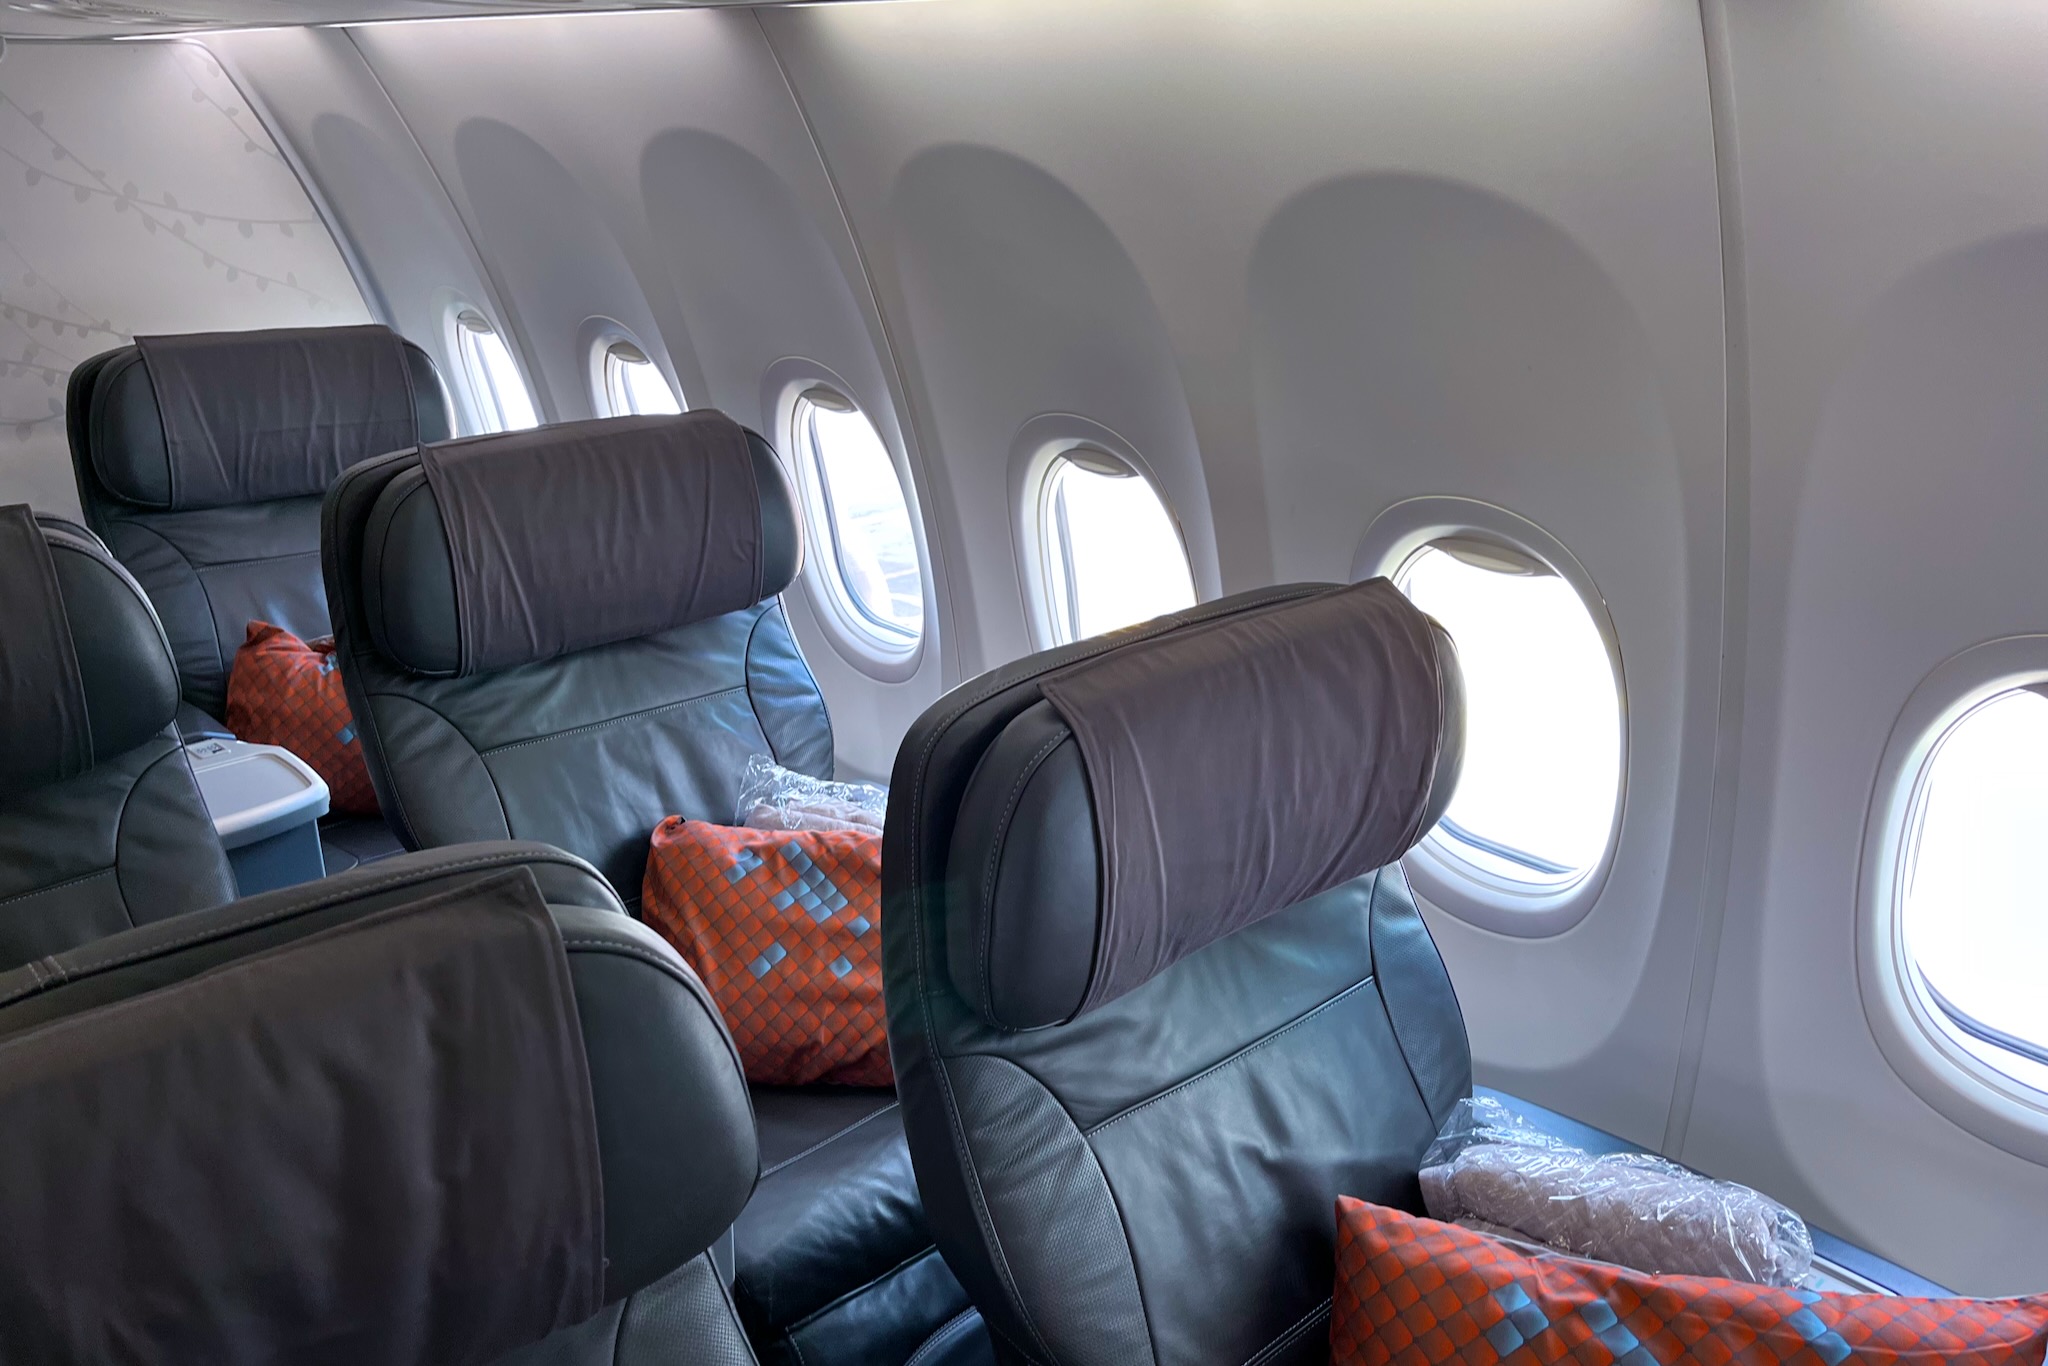 Read more about the article Singapore Airlines Business Class Boeing 737-800 NG nach Singapur